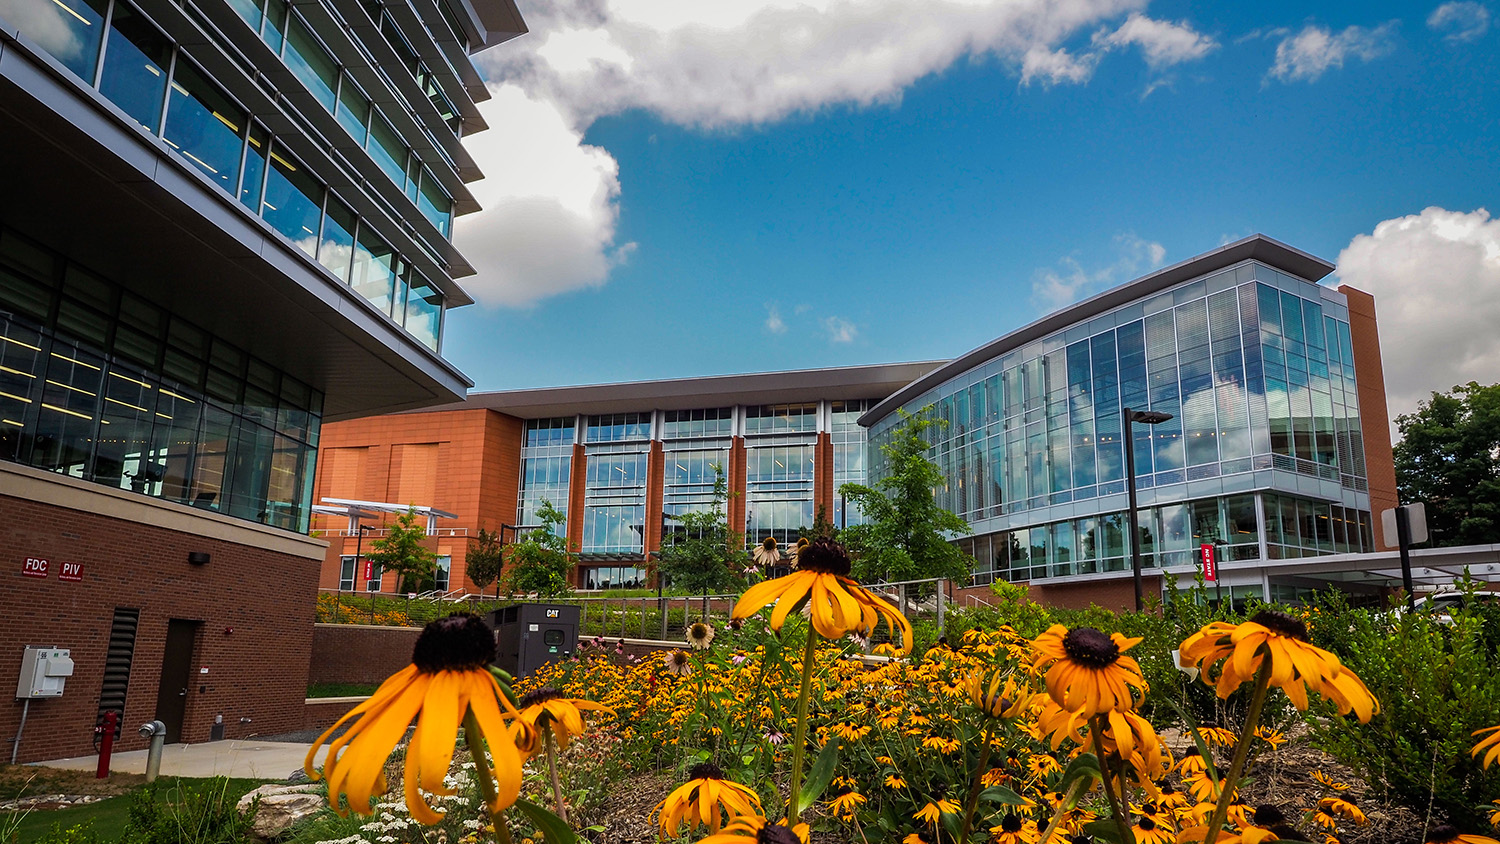 NC State's Talley Student Union is framed by summer flowers. Photo by Marc Hall